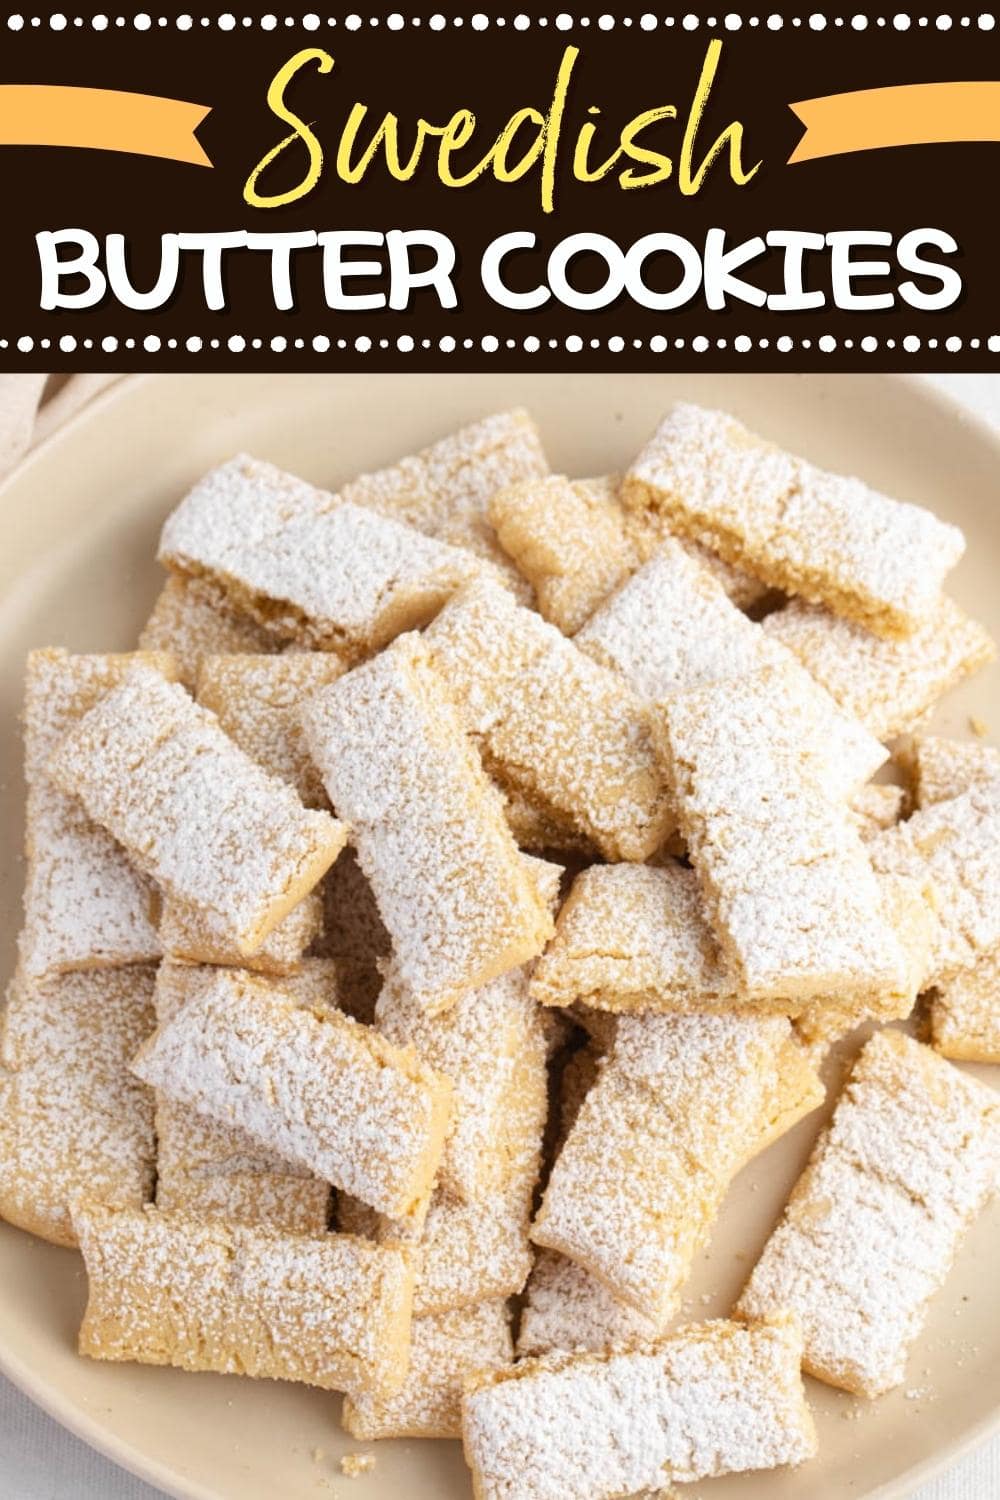 Swedish Butter Cookies (Traditional Recipe) - Insanely Good